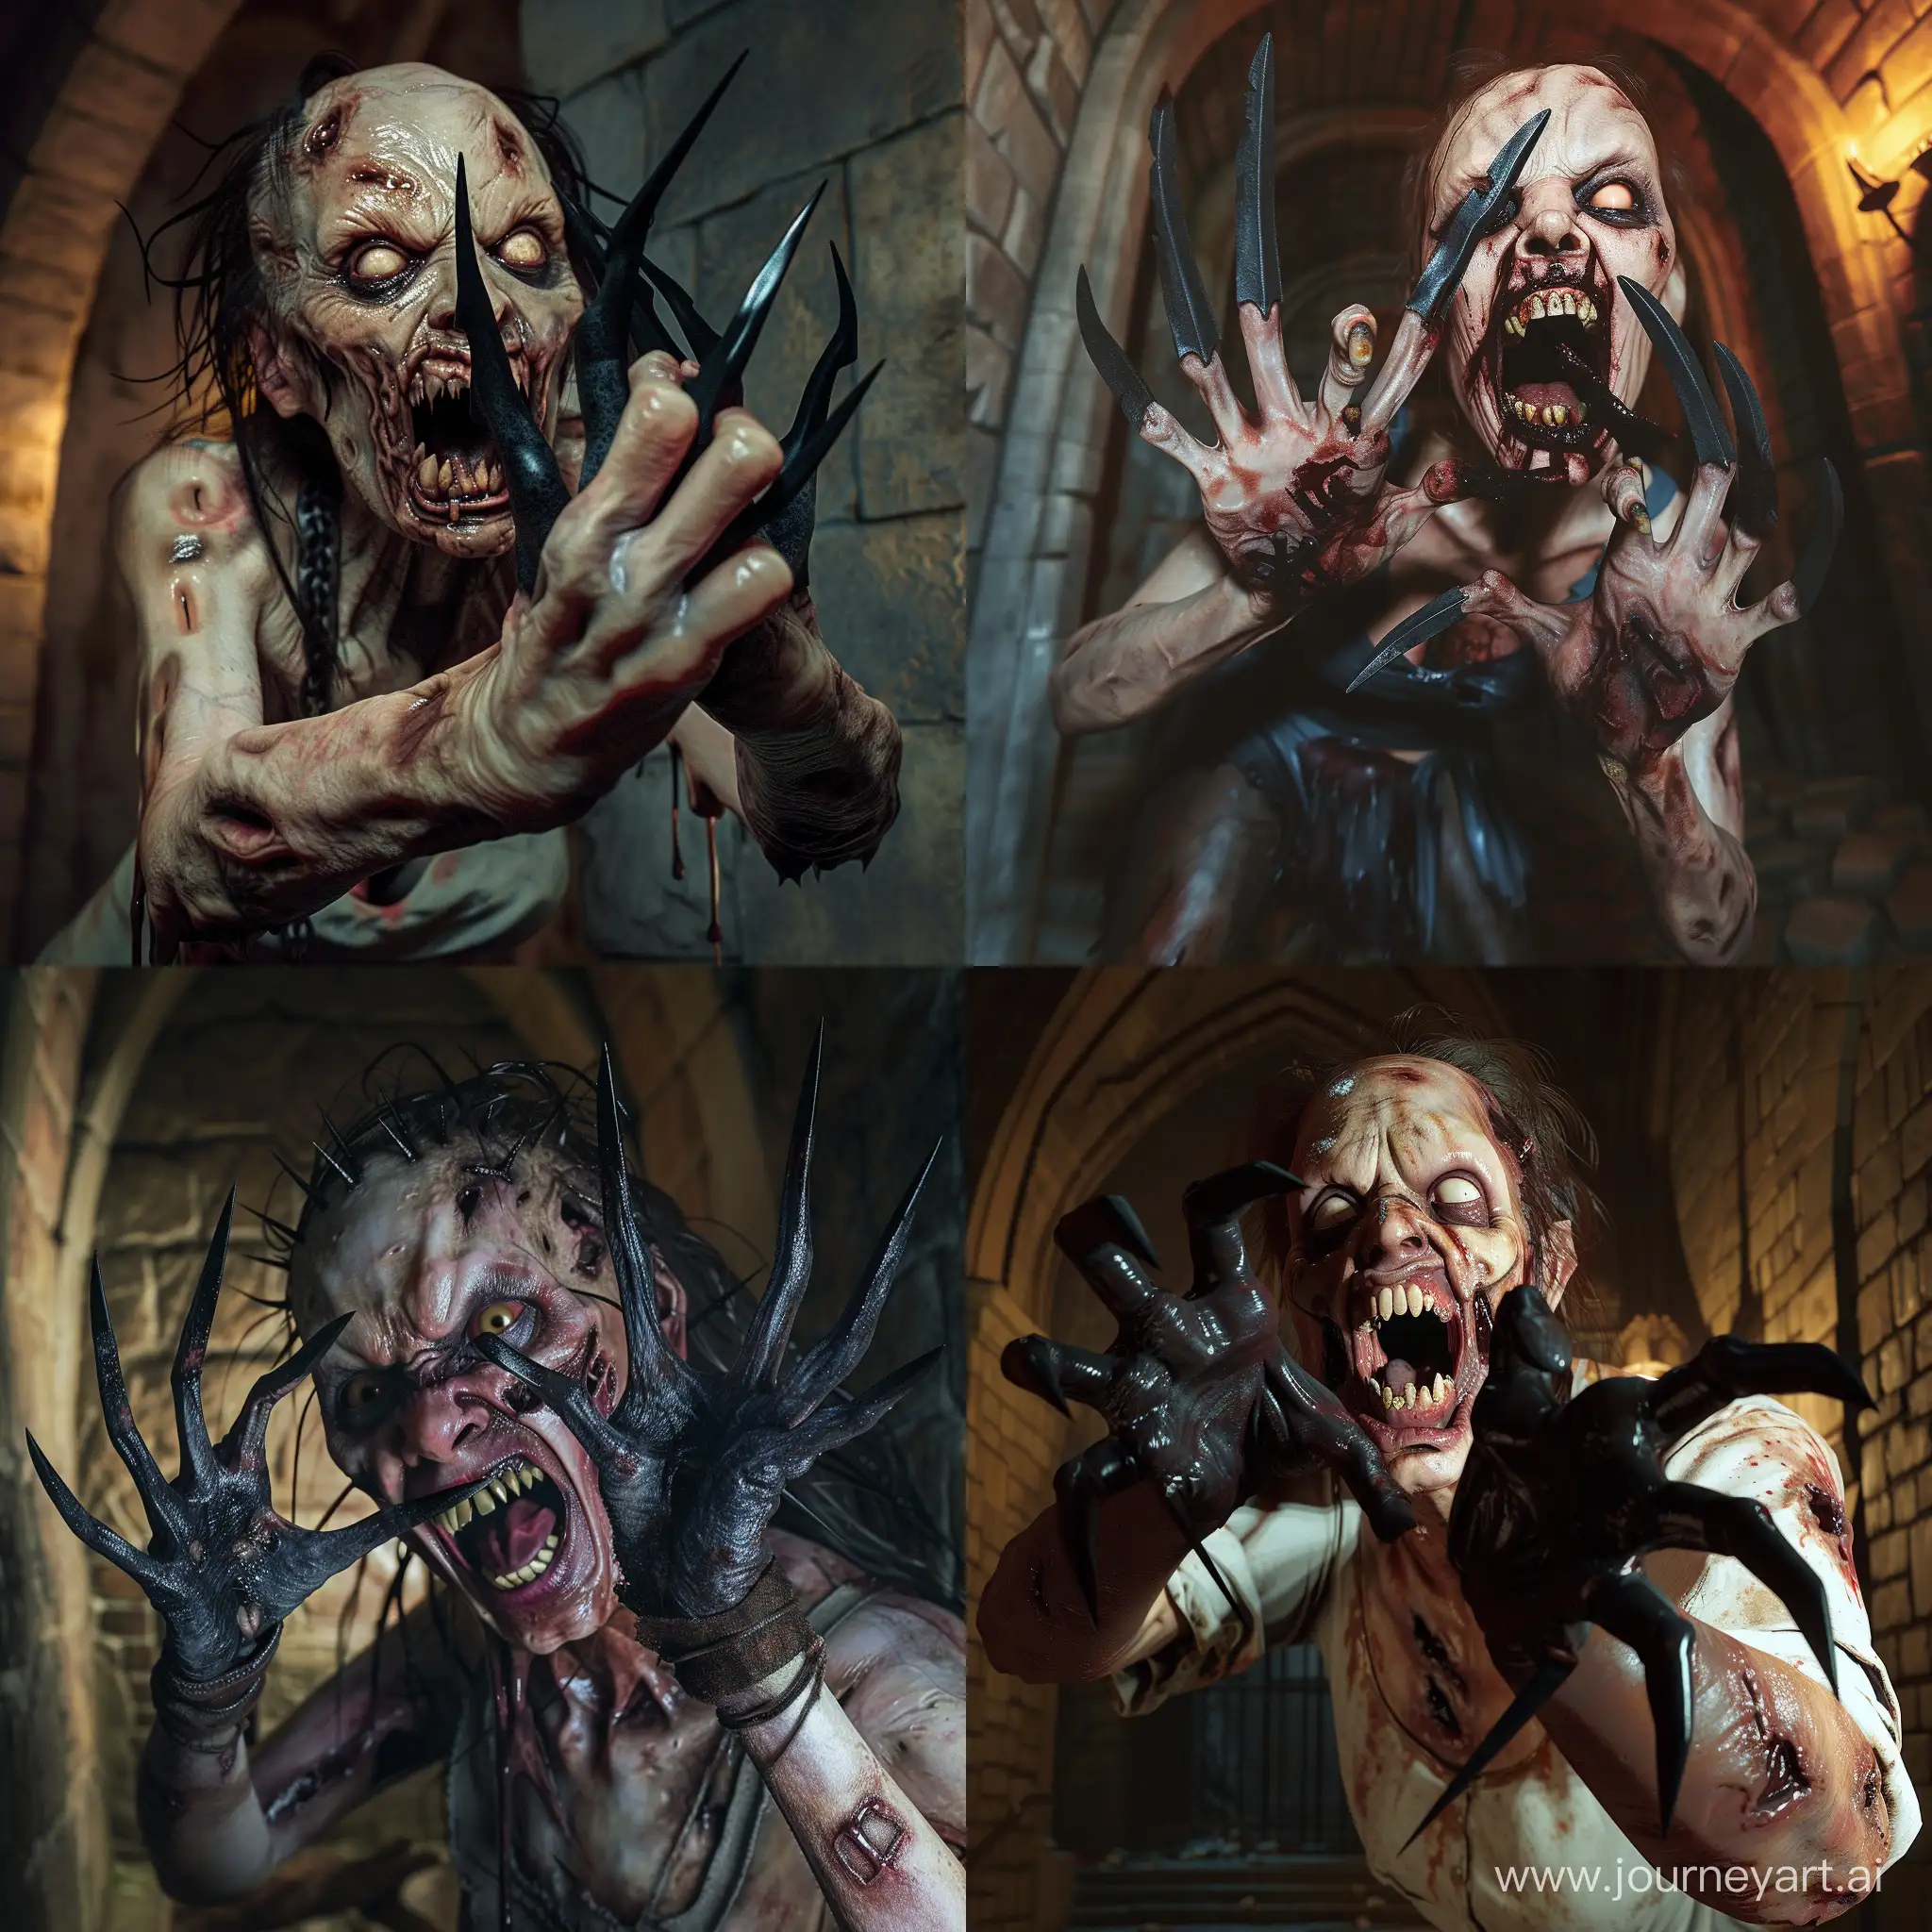 Undead A horrible rotting female zombie attacks using her pointed black claws on her own five-fingered hands, her mouth dangerously open, exposing pointed teeth resembling fangs. The action takes place in a dark crypt. High detail, photorealism, hyperrealism.